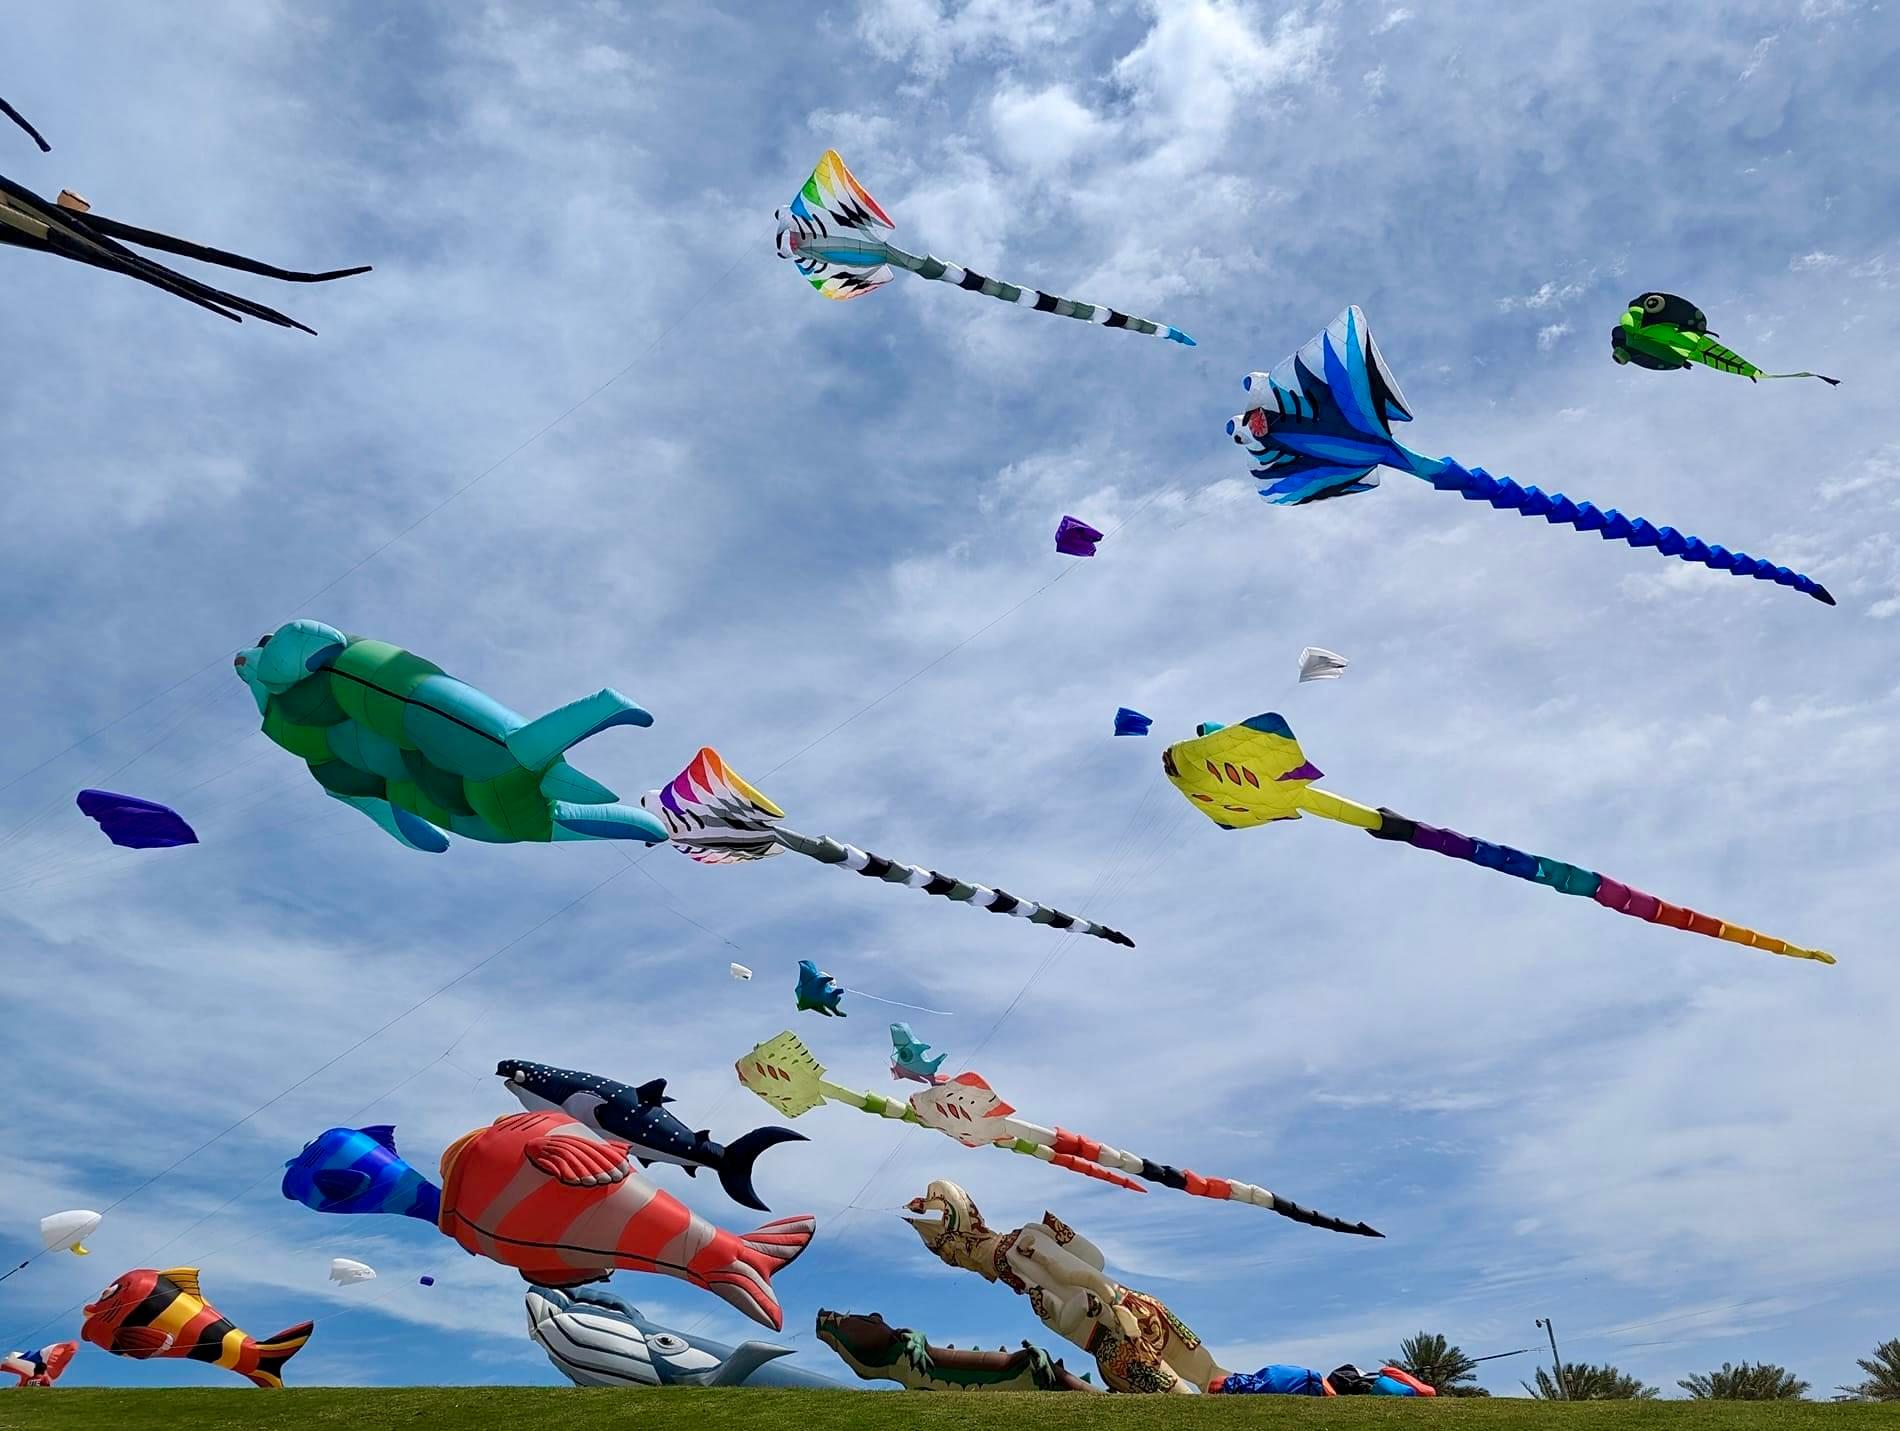 California Resident Brings Joy to the Community and Beyond With Giant Colorful Kites